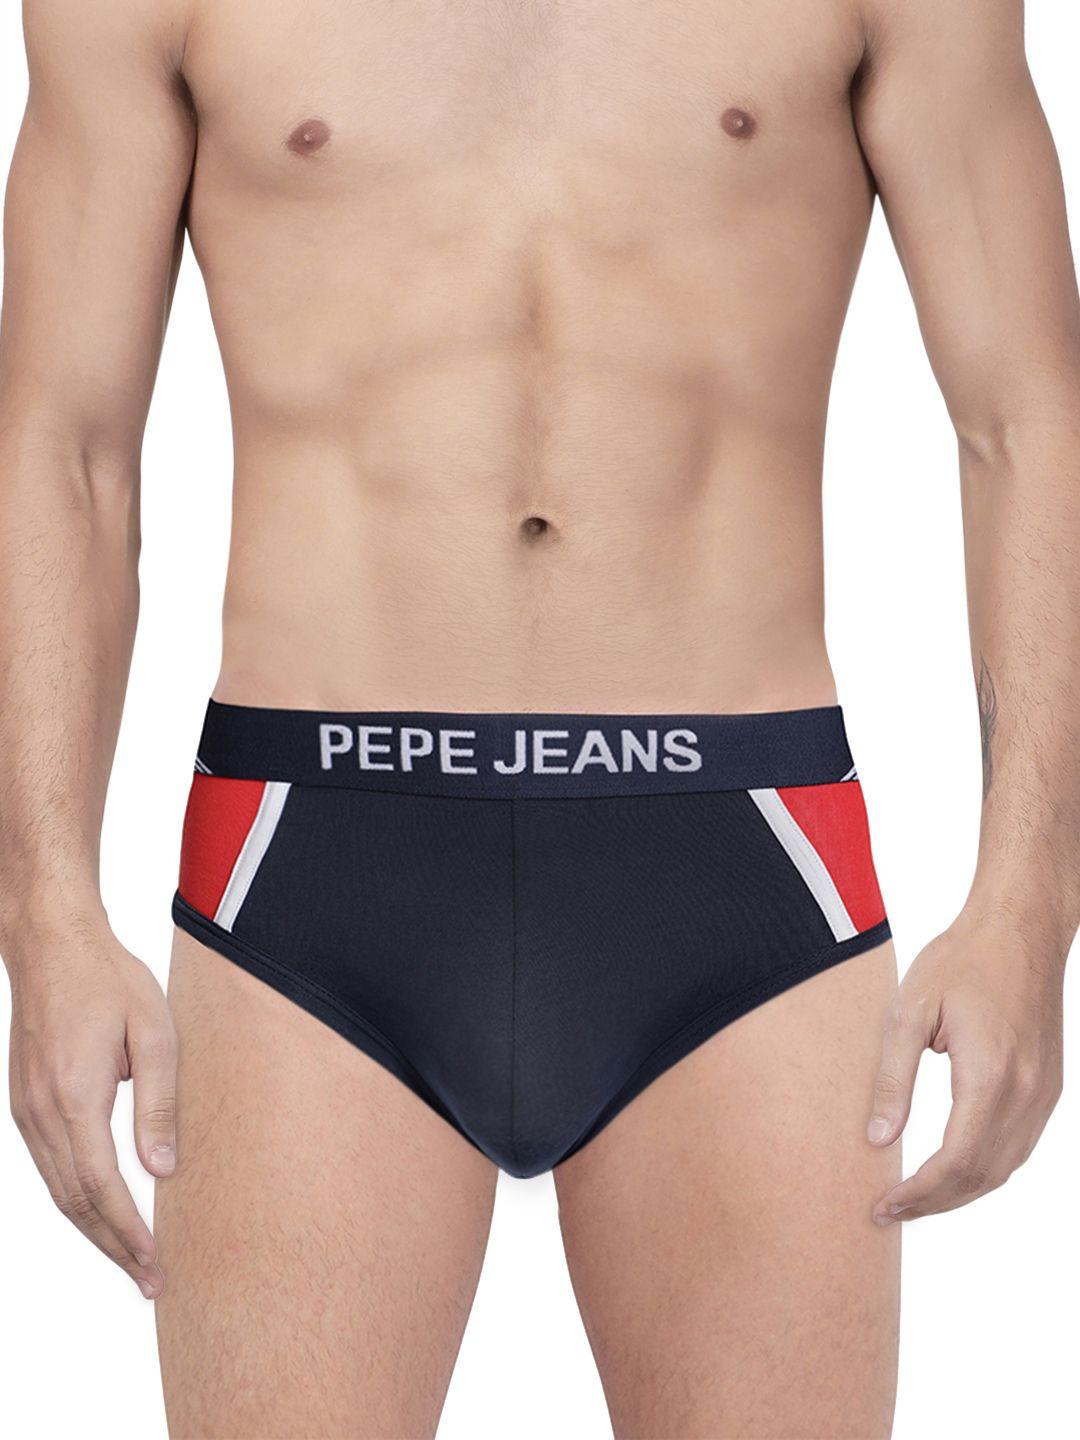 pepe-jeans-men-navy-&-red-colourblocked-briefs-8904311303671